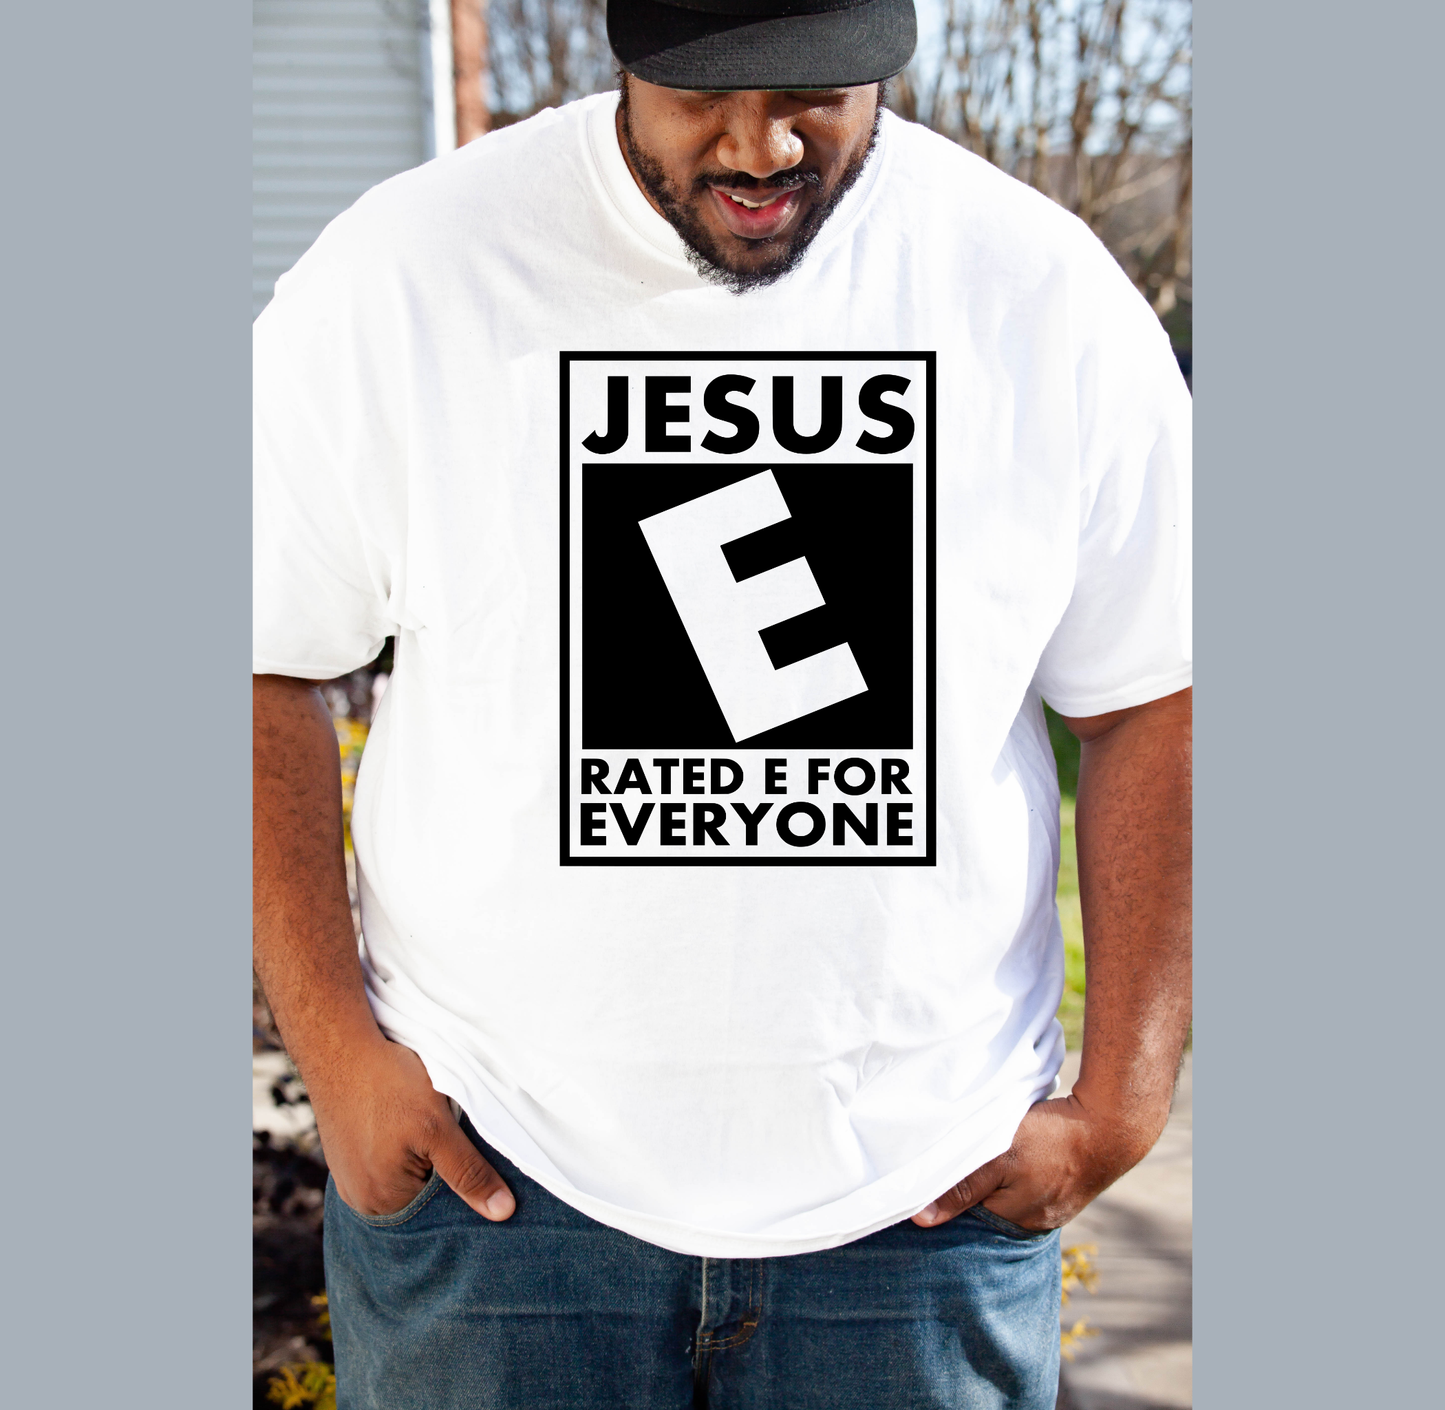 Jesus rated E for everyone T-shirt